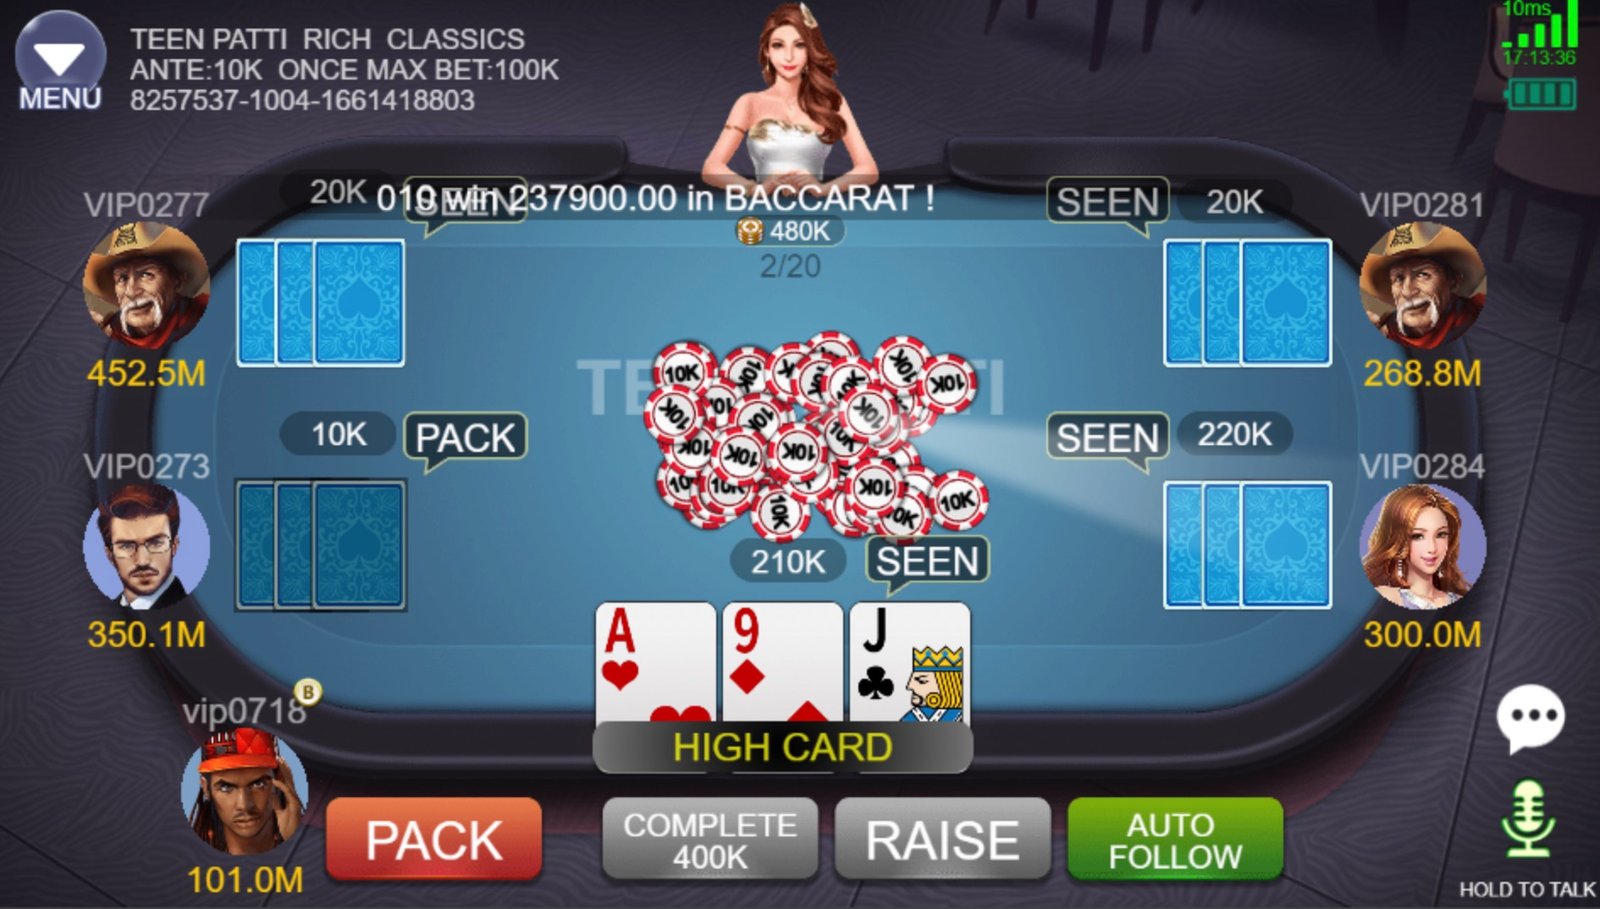 Features Of Teen Patti Club